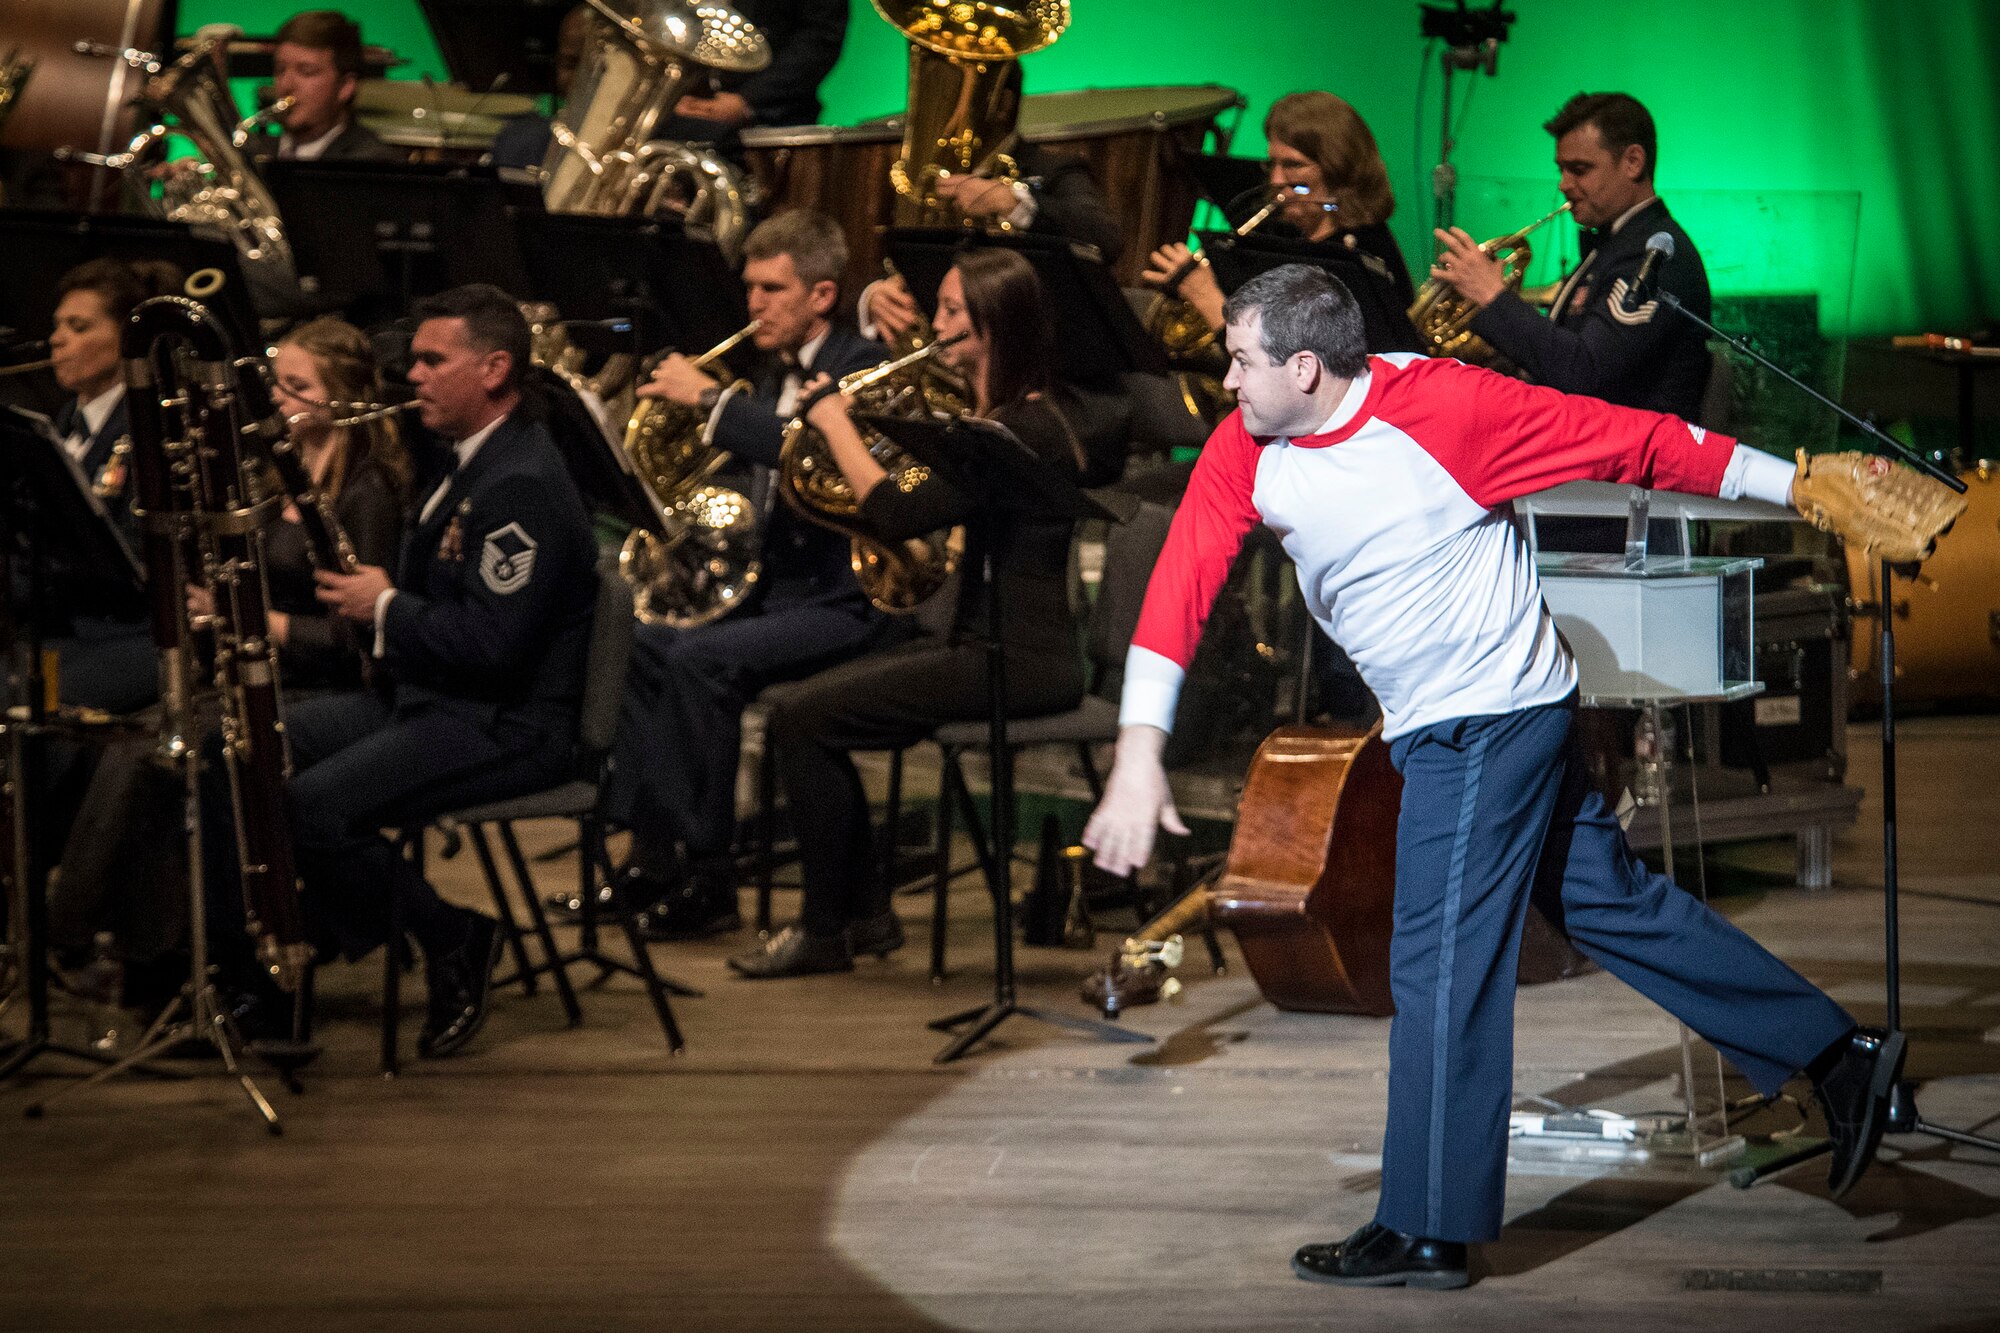 A U.S. Air Force Academy Band member plays the role of a pitcher during a musical performance of ‘The National Game’ Feb. 13 at Weber State University’s Austad Auditorium. (U.S. Air Force photo)